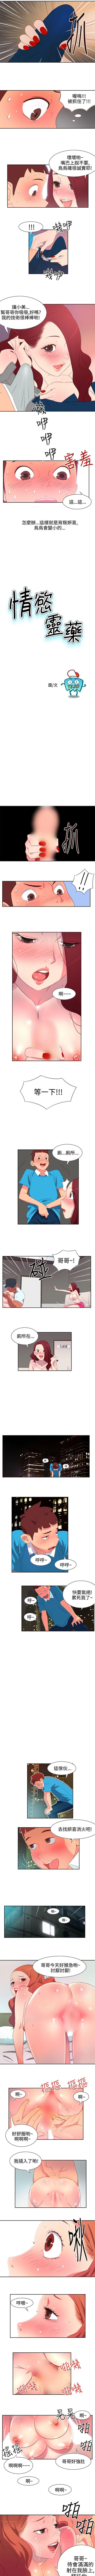 Chat 情慾靈藥 1-77 Hugecock - Page 8